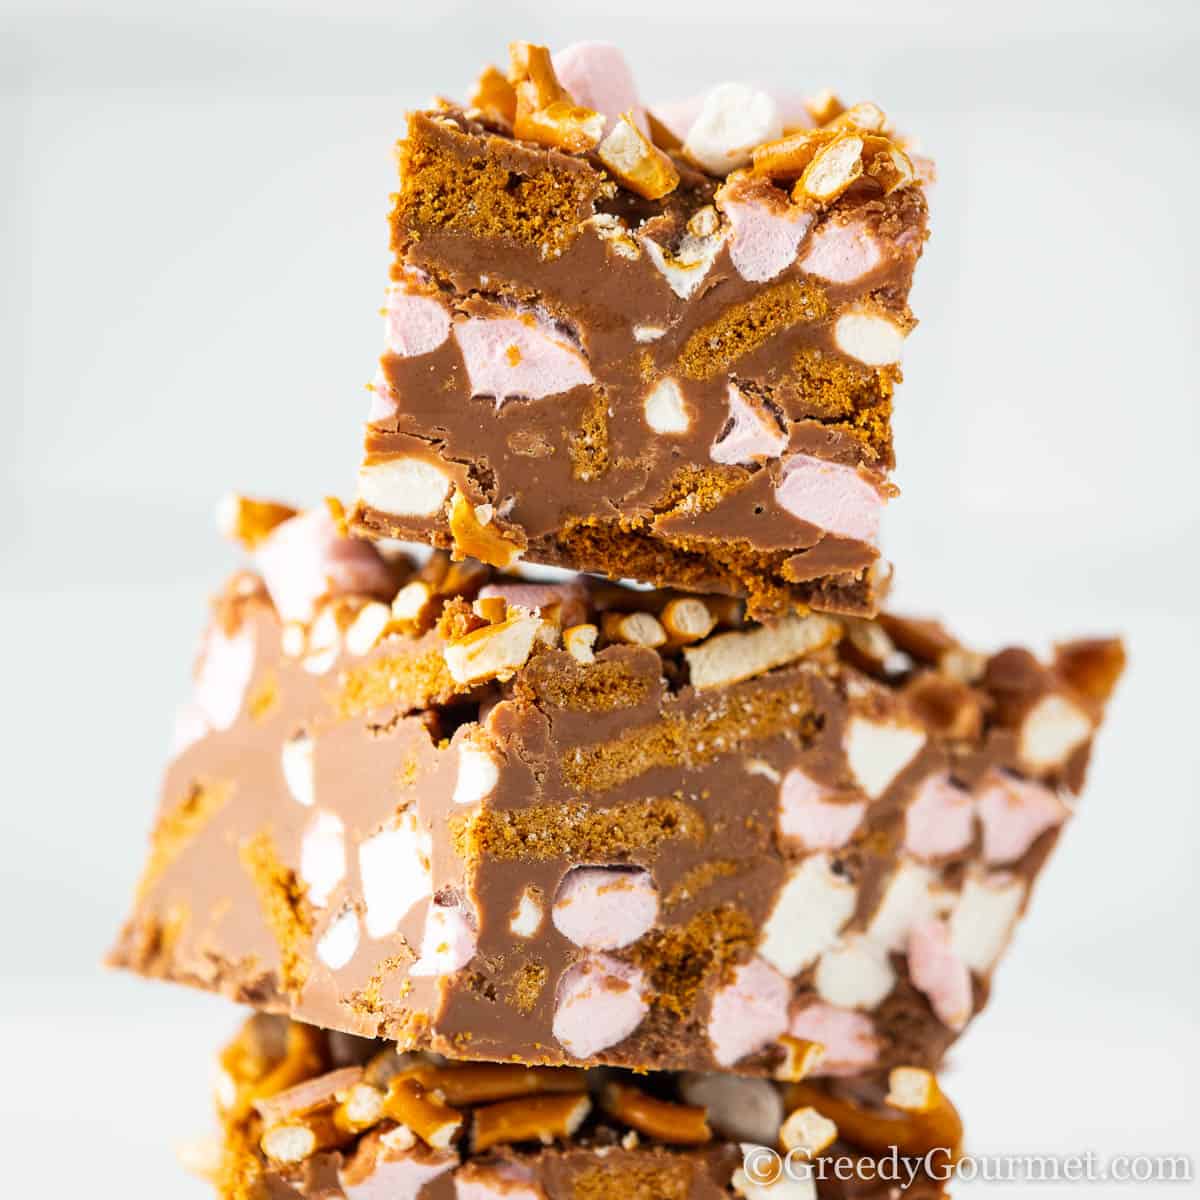 Piled high and upclose of a Rocky Road recipe